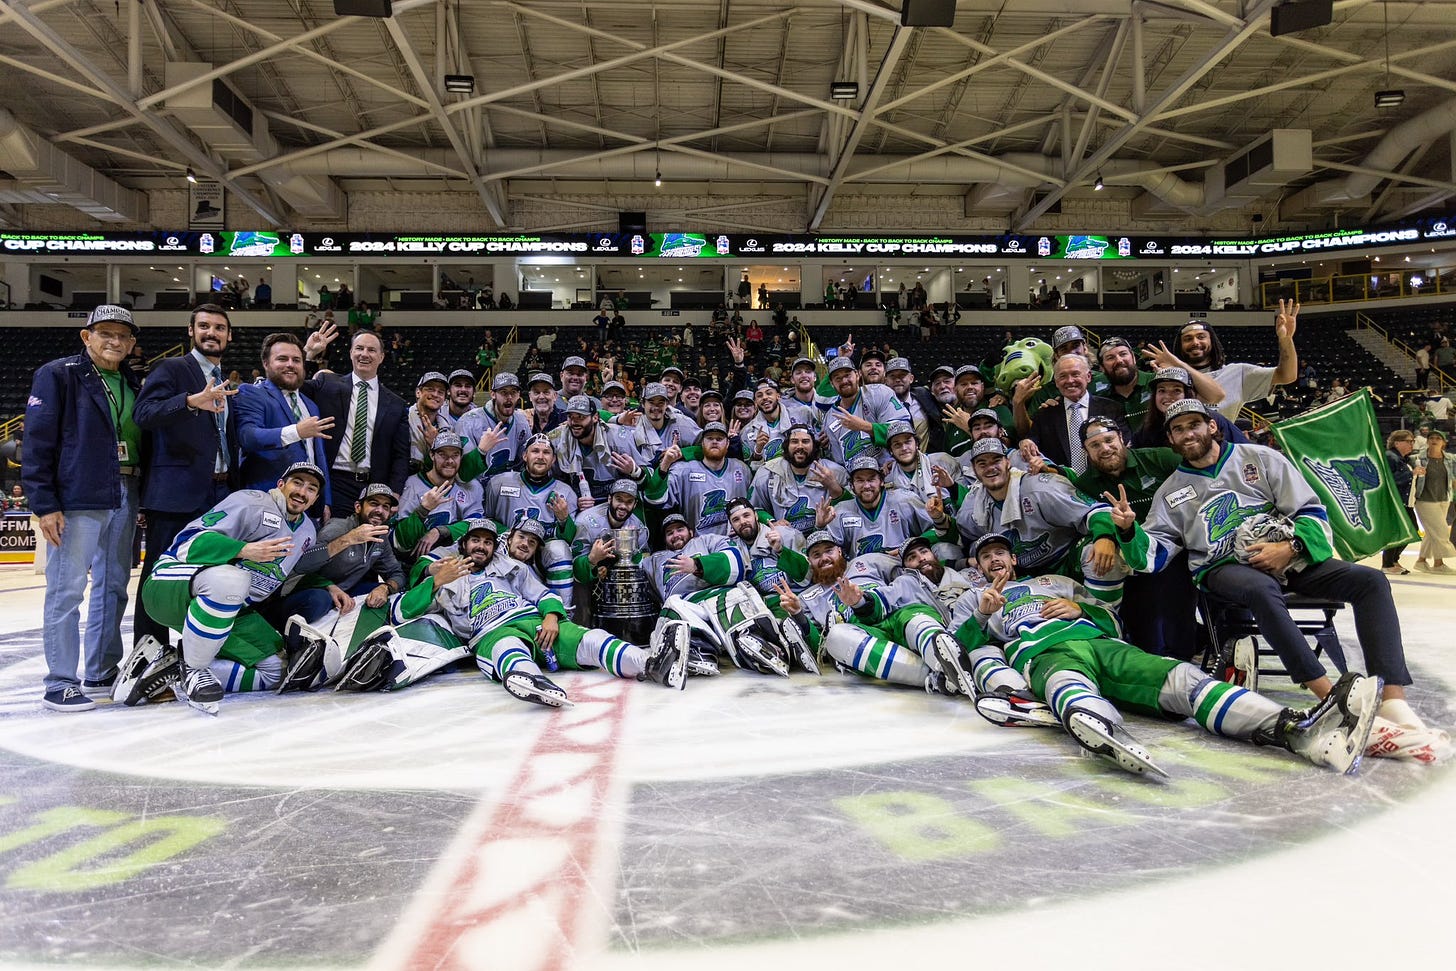 The Florida Everblades players, coaches, and executives post with the Kelly Cup after winning the championship.